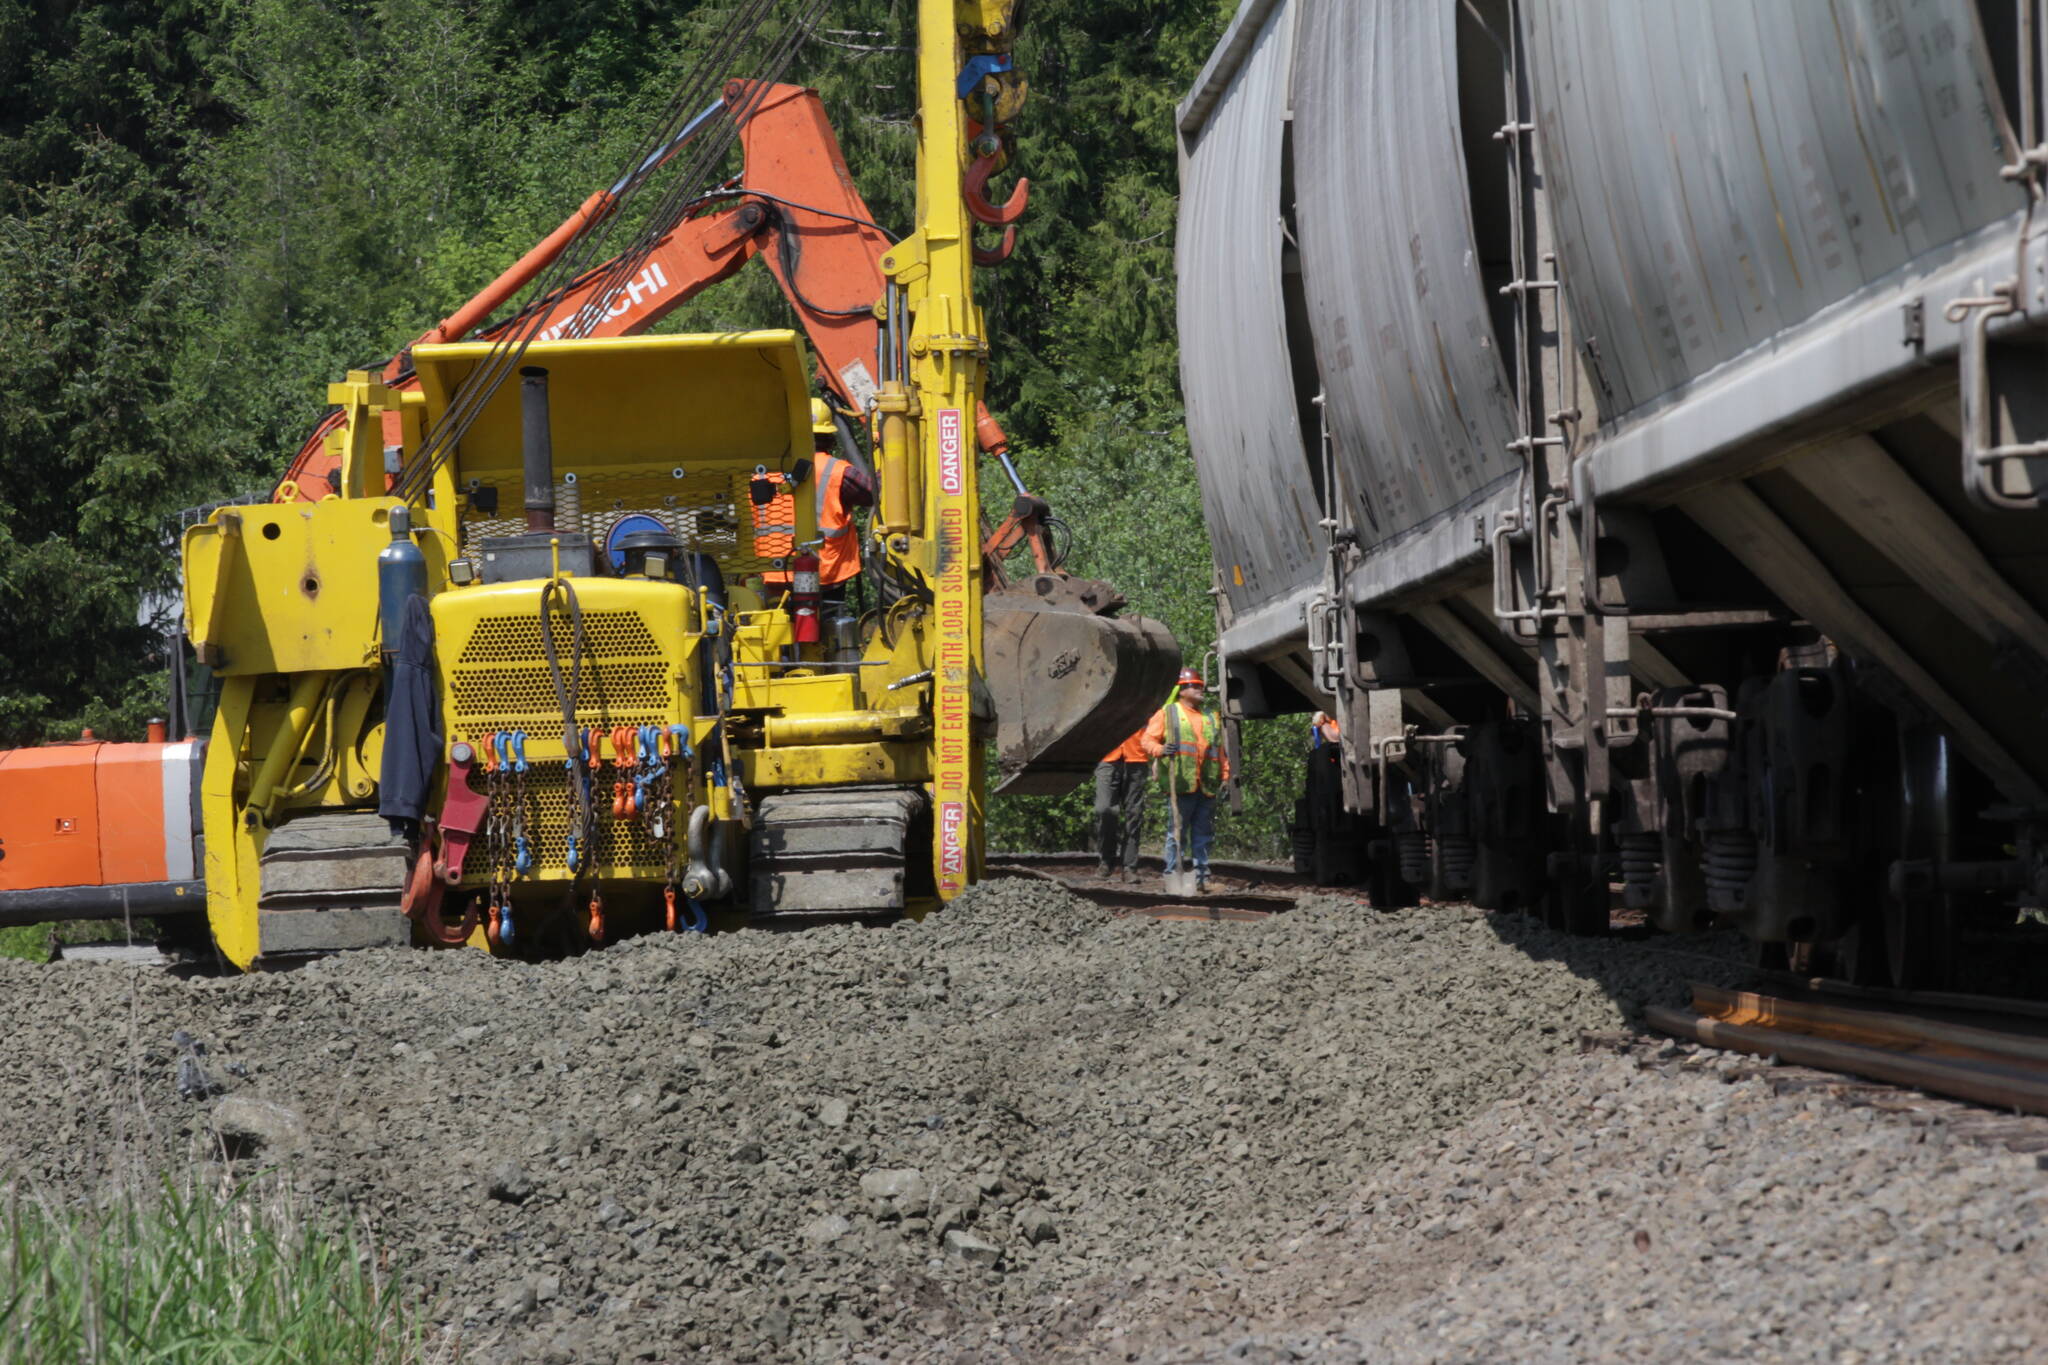 Michael S. Lockett / The Daily World
Crews work to rerail train cars carrying soymeal on May 17 on a Puget Sound & Pacific Railroad train that had eight cars derail Sunday in Central Park as a result of thermal misalignment, or heat expansion, of the tracks.